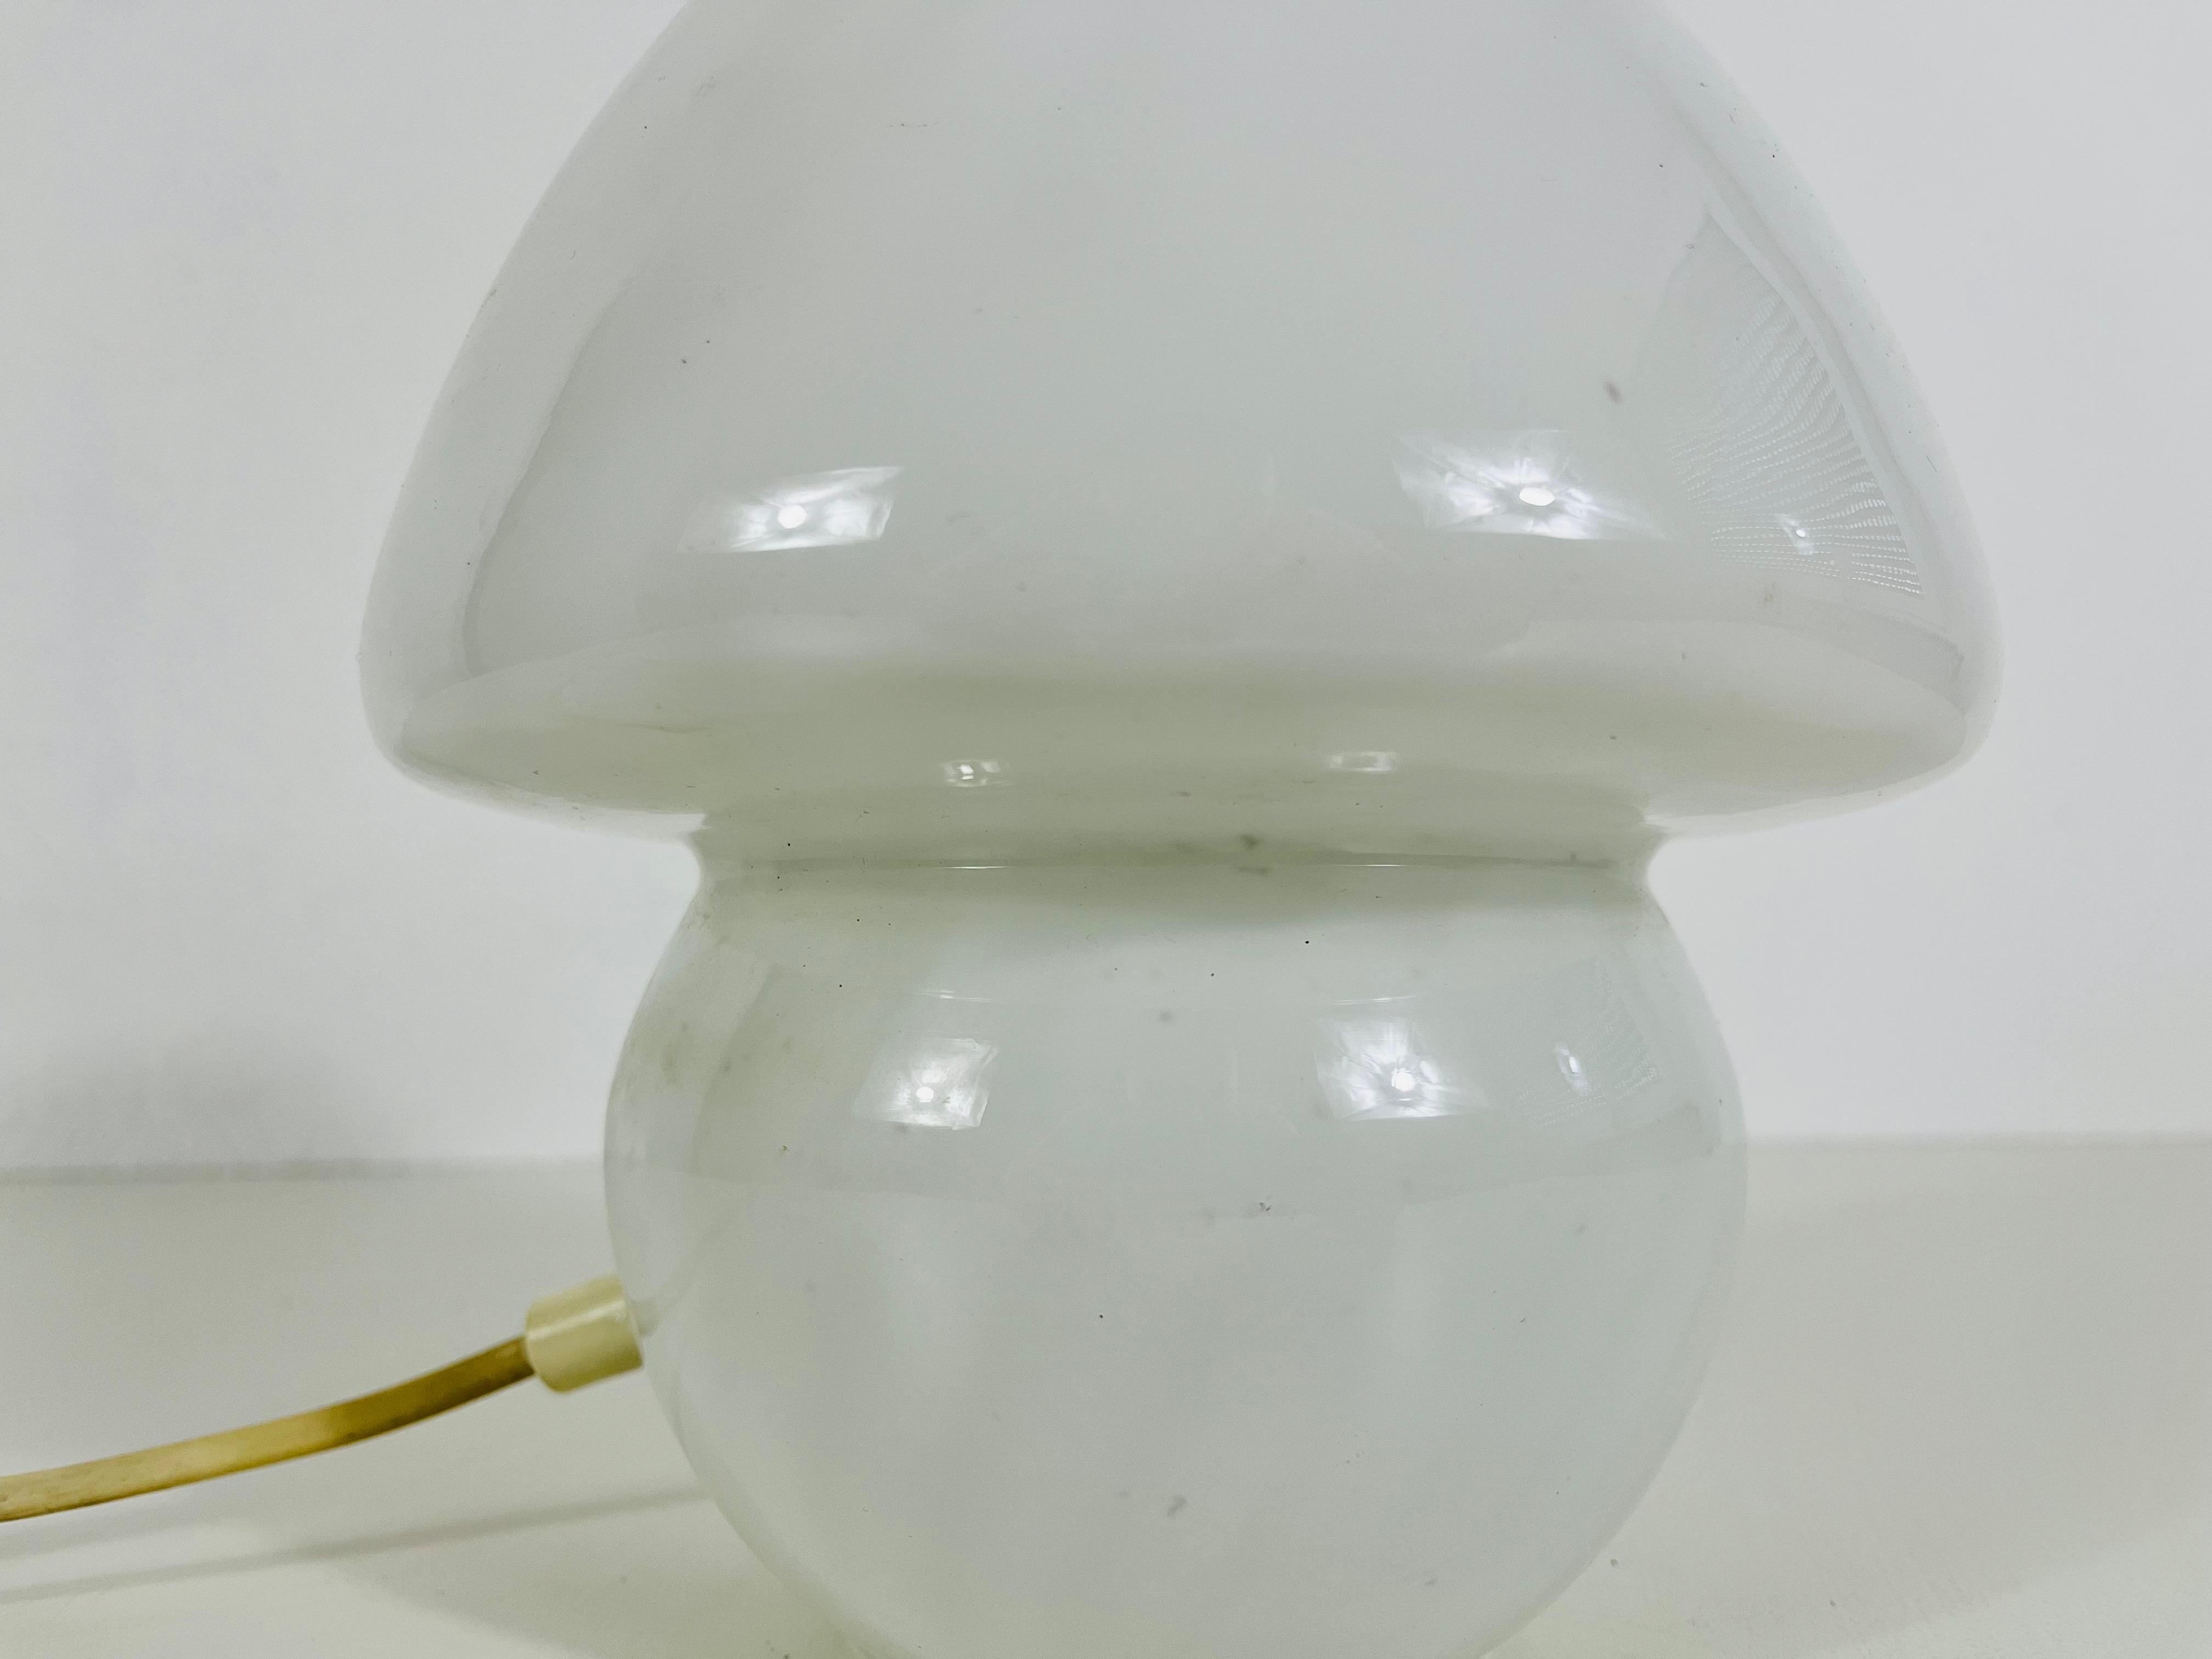 Late 20th Century Murano Glass Mushroom Table Lamp by Vetri d‘Arte, Italy, 1970s For Sale